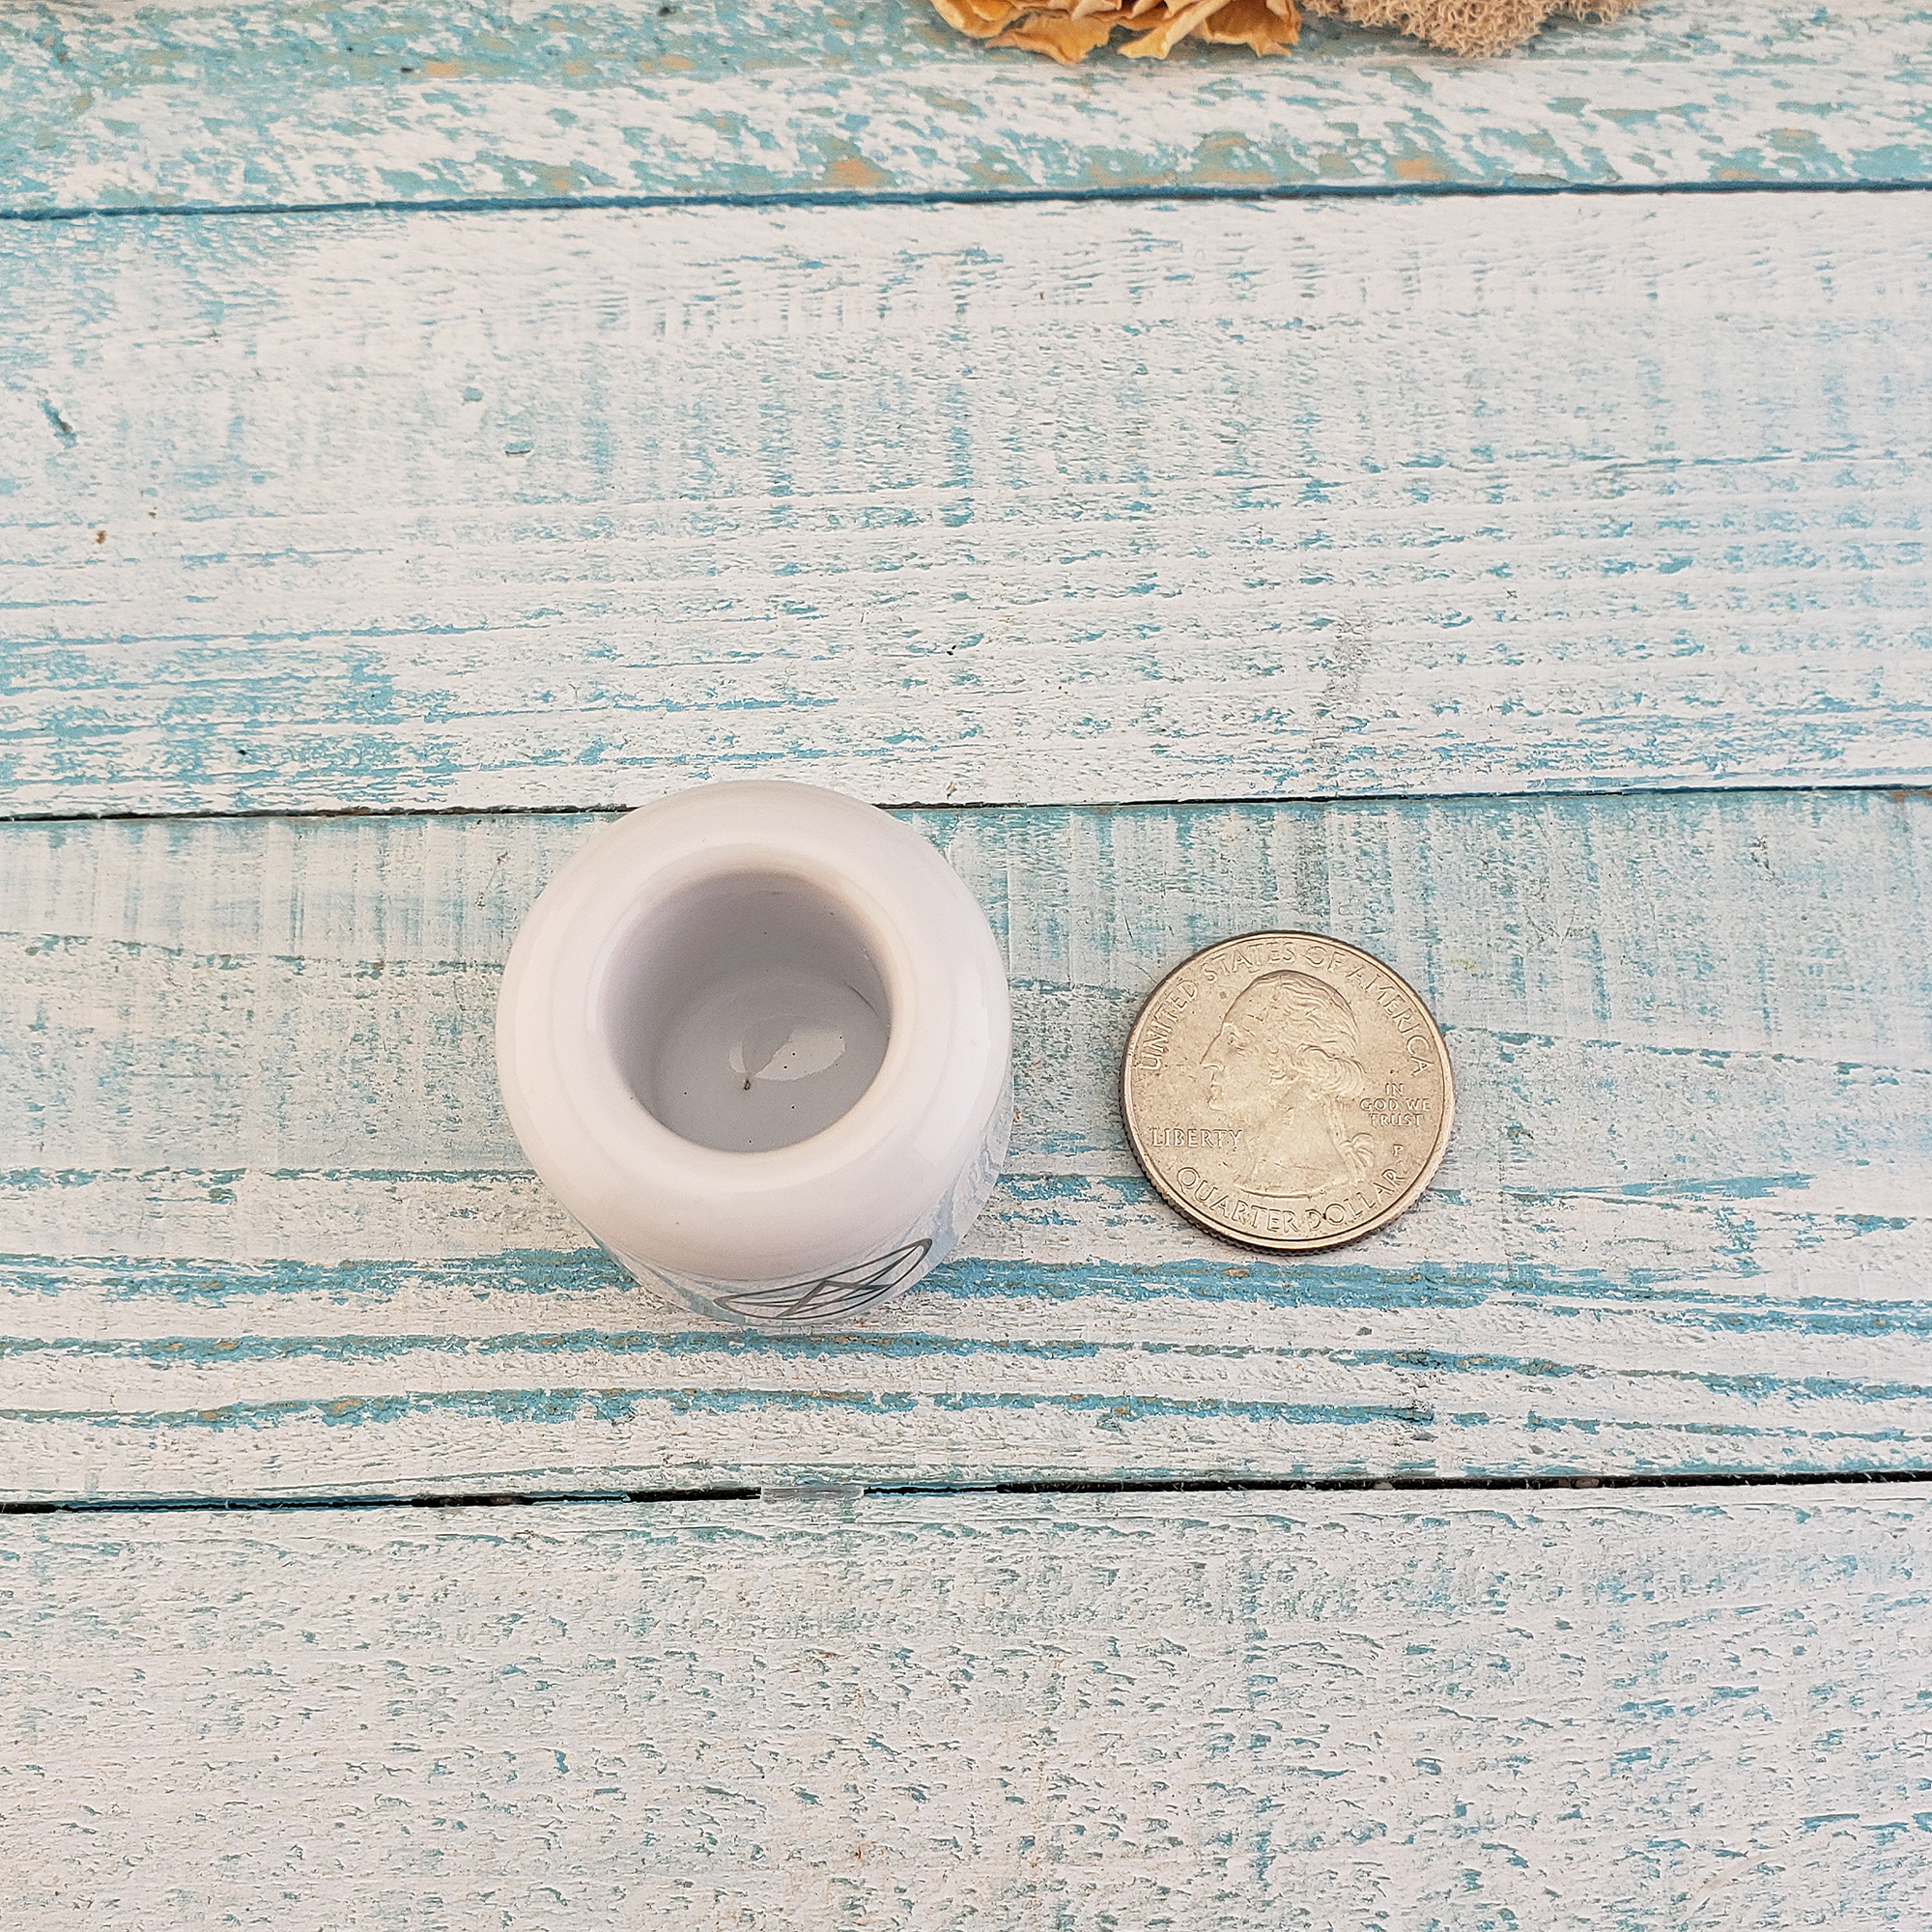 White Pentacle Ceramic Sphere Stand - Chime Candle Holder - Incense Holder - Size Comparison to Quarter